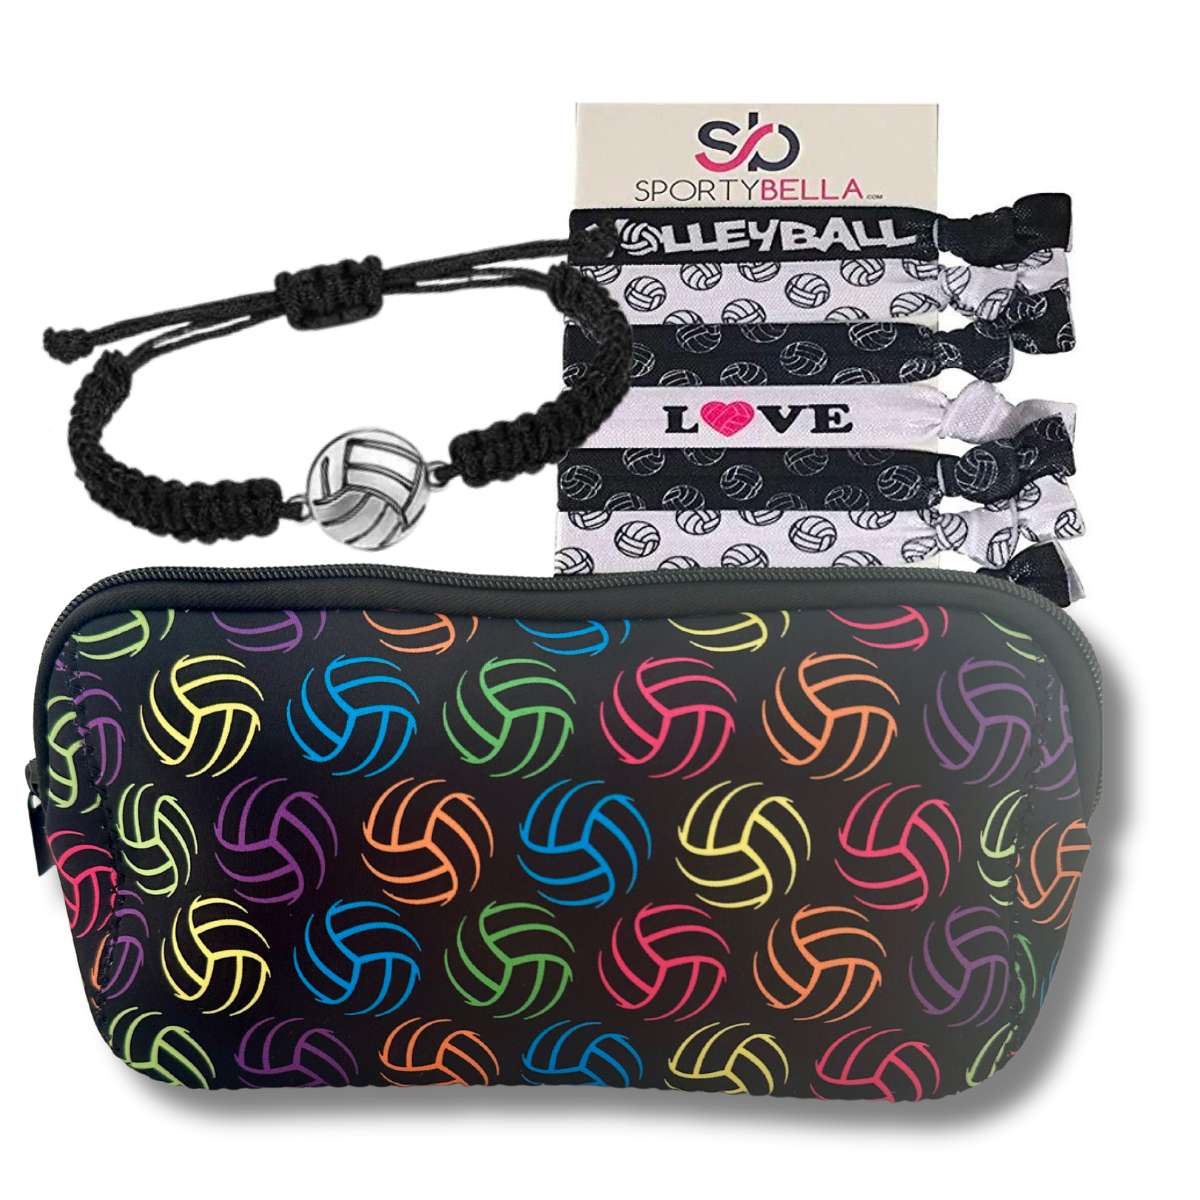 Volleyball Cosmetic Bag and Bracelet Gift Bundle